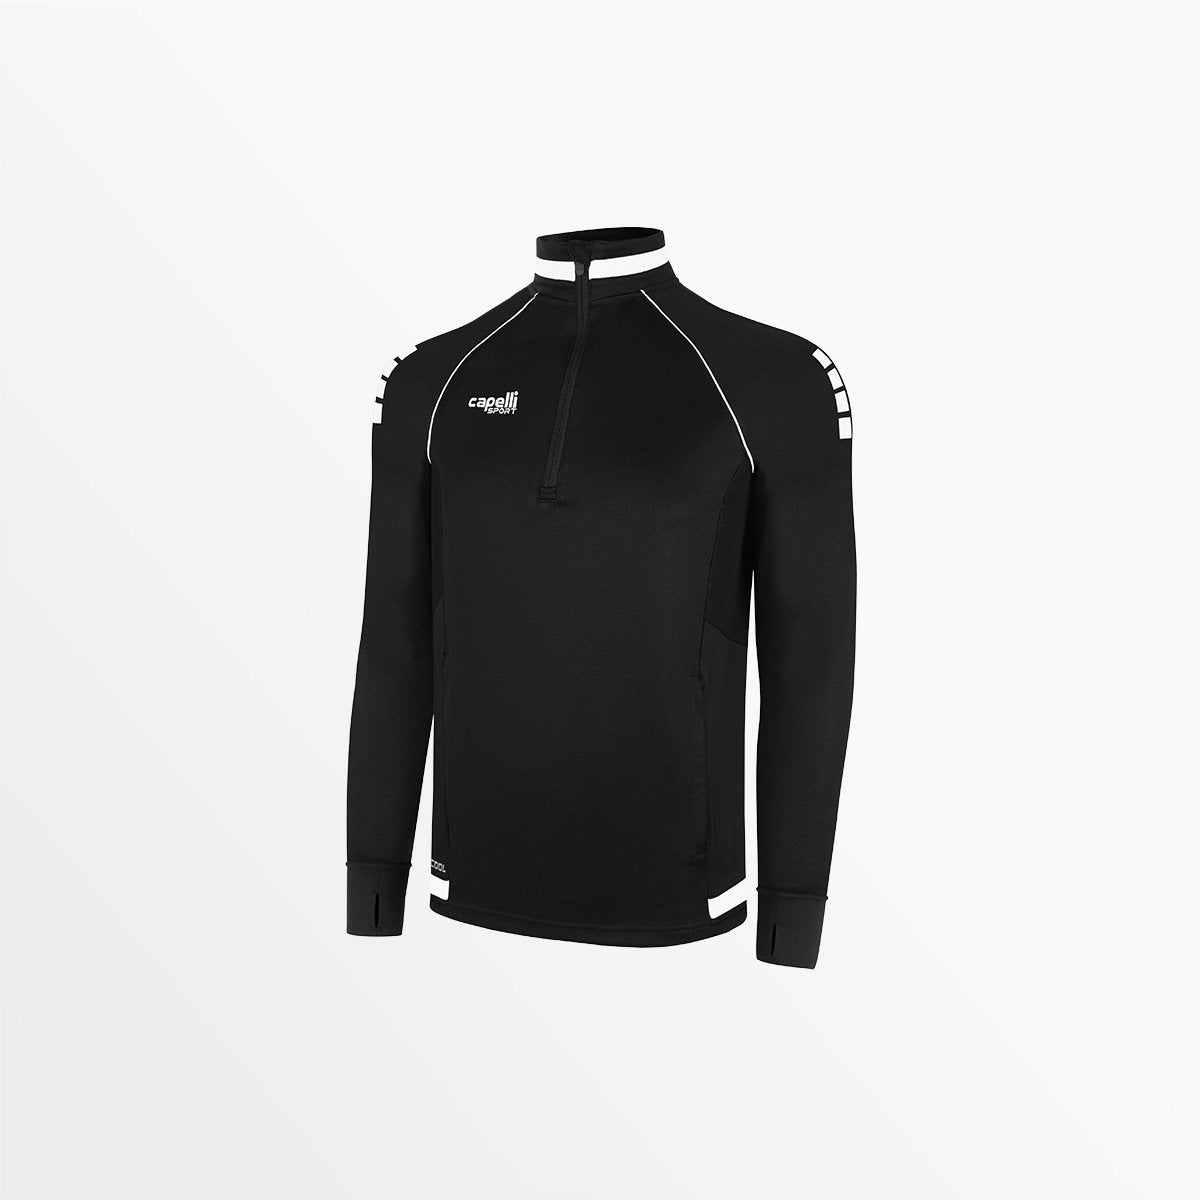 YOUTH UPTOWN 1/4 ZIP TRAINING TOP